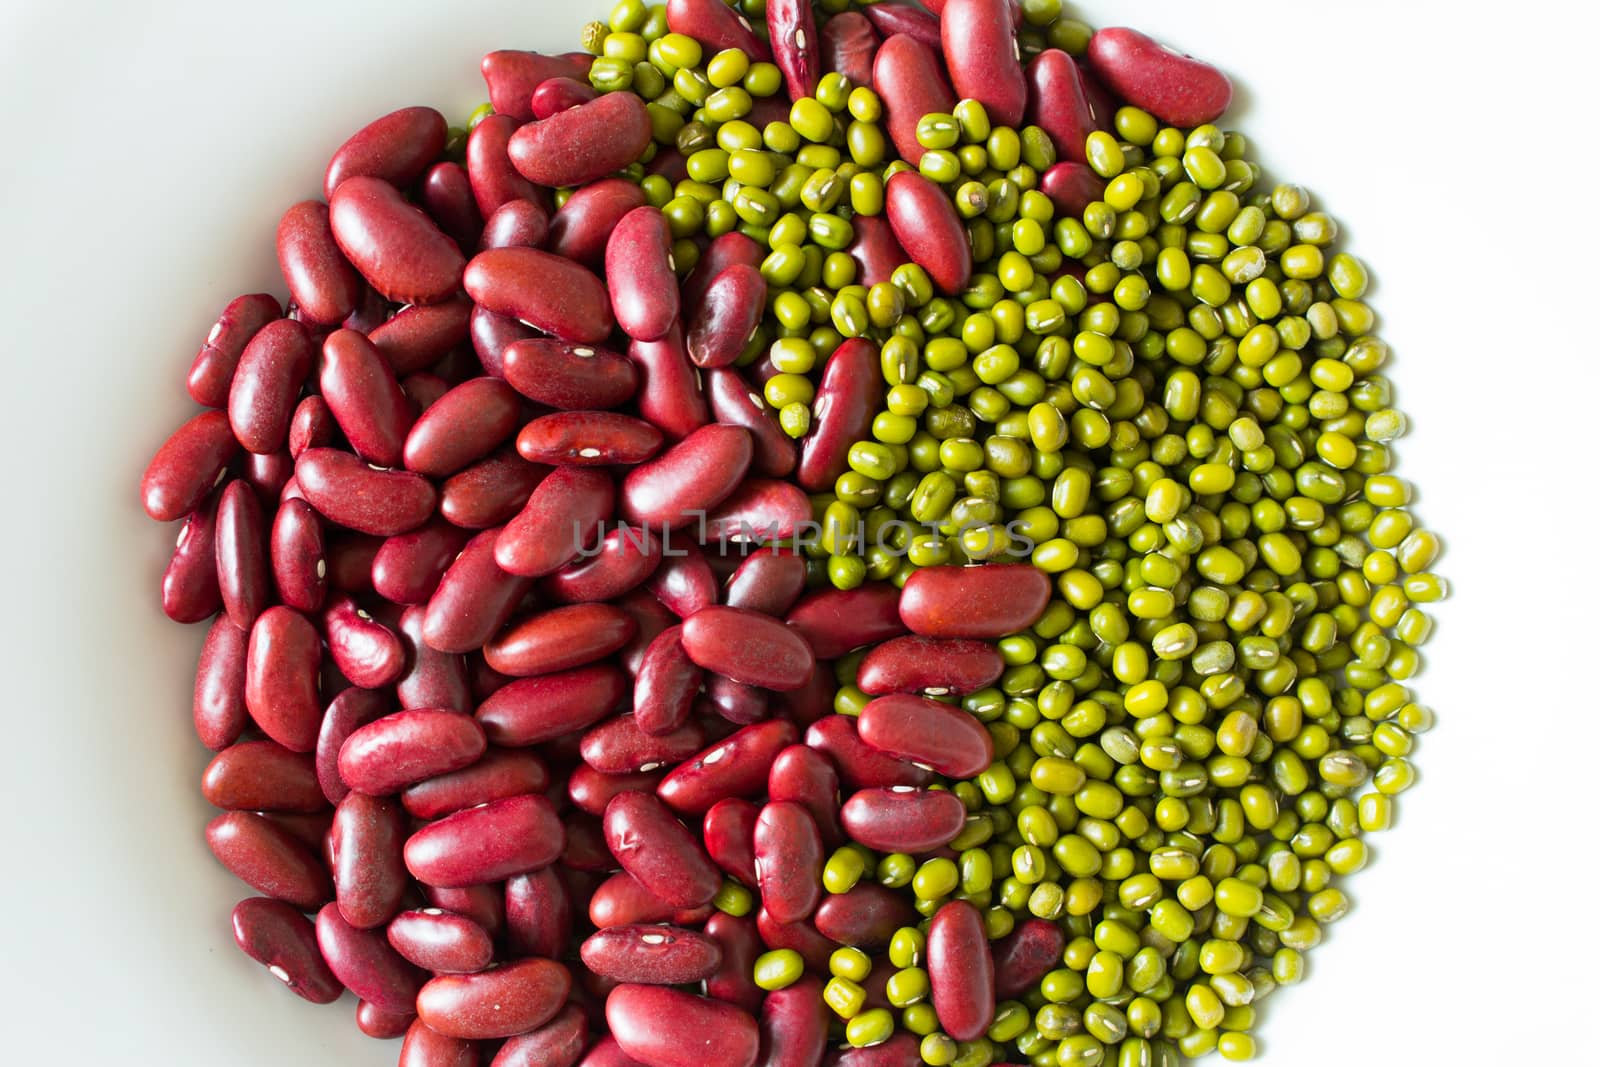 Red Beans Blended with Green Beans  by oodfon